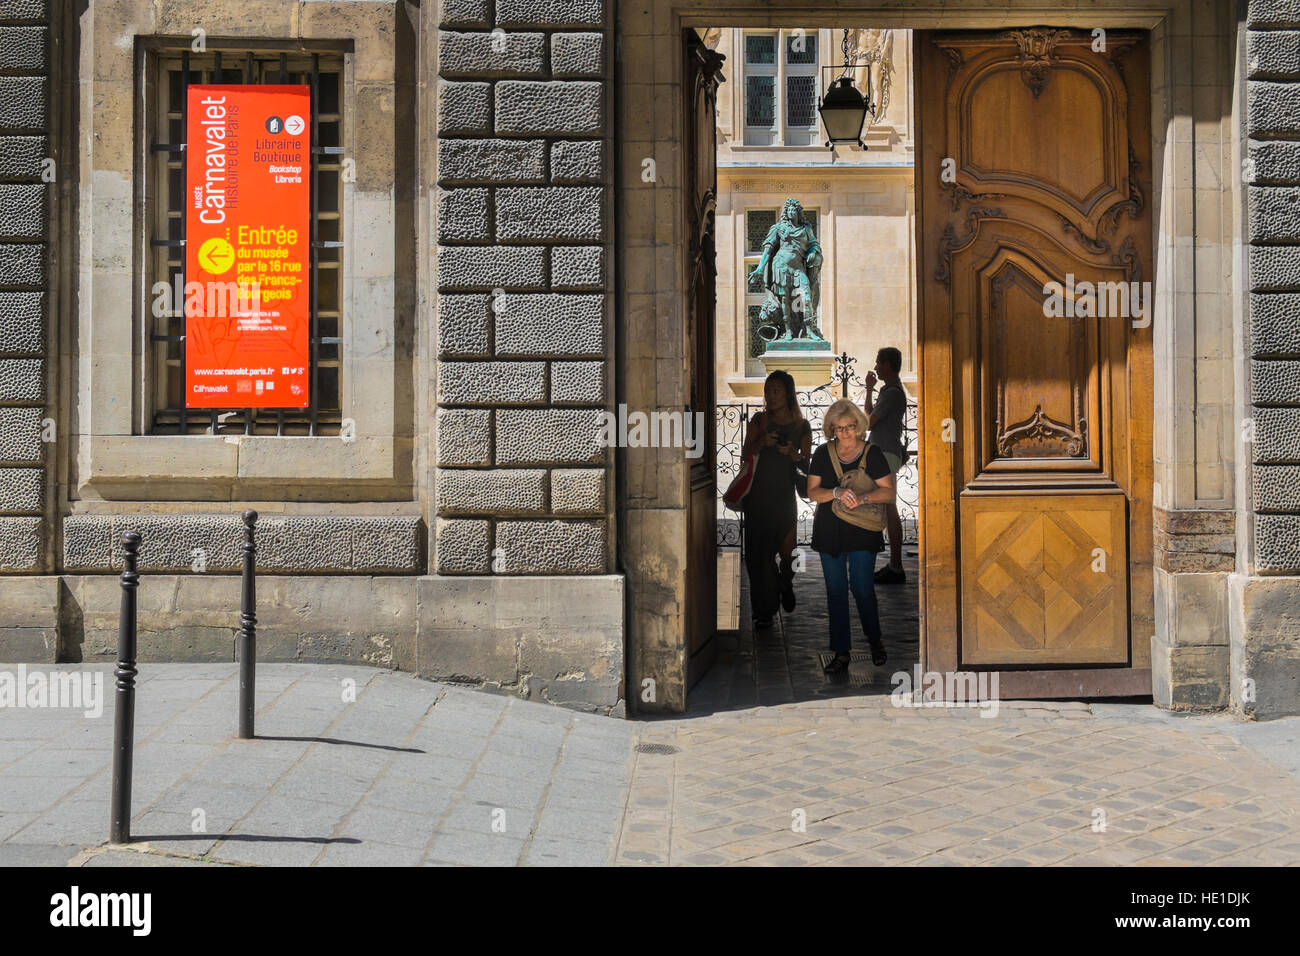 entrance and inner courtyard of carnavalet museum Stock Photo